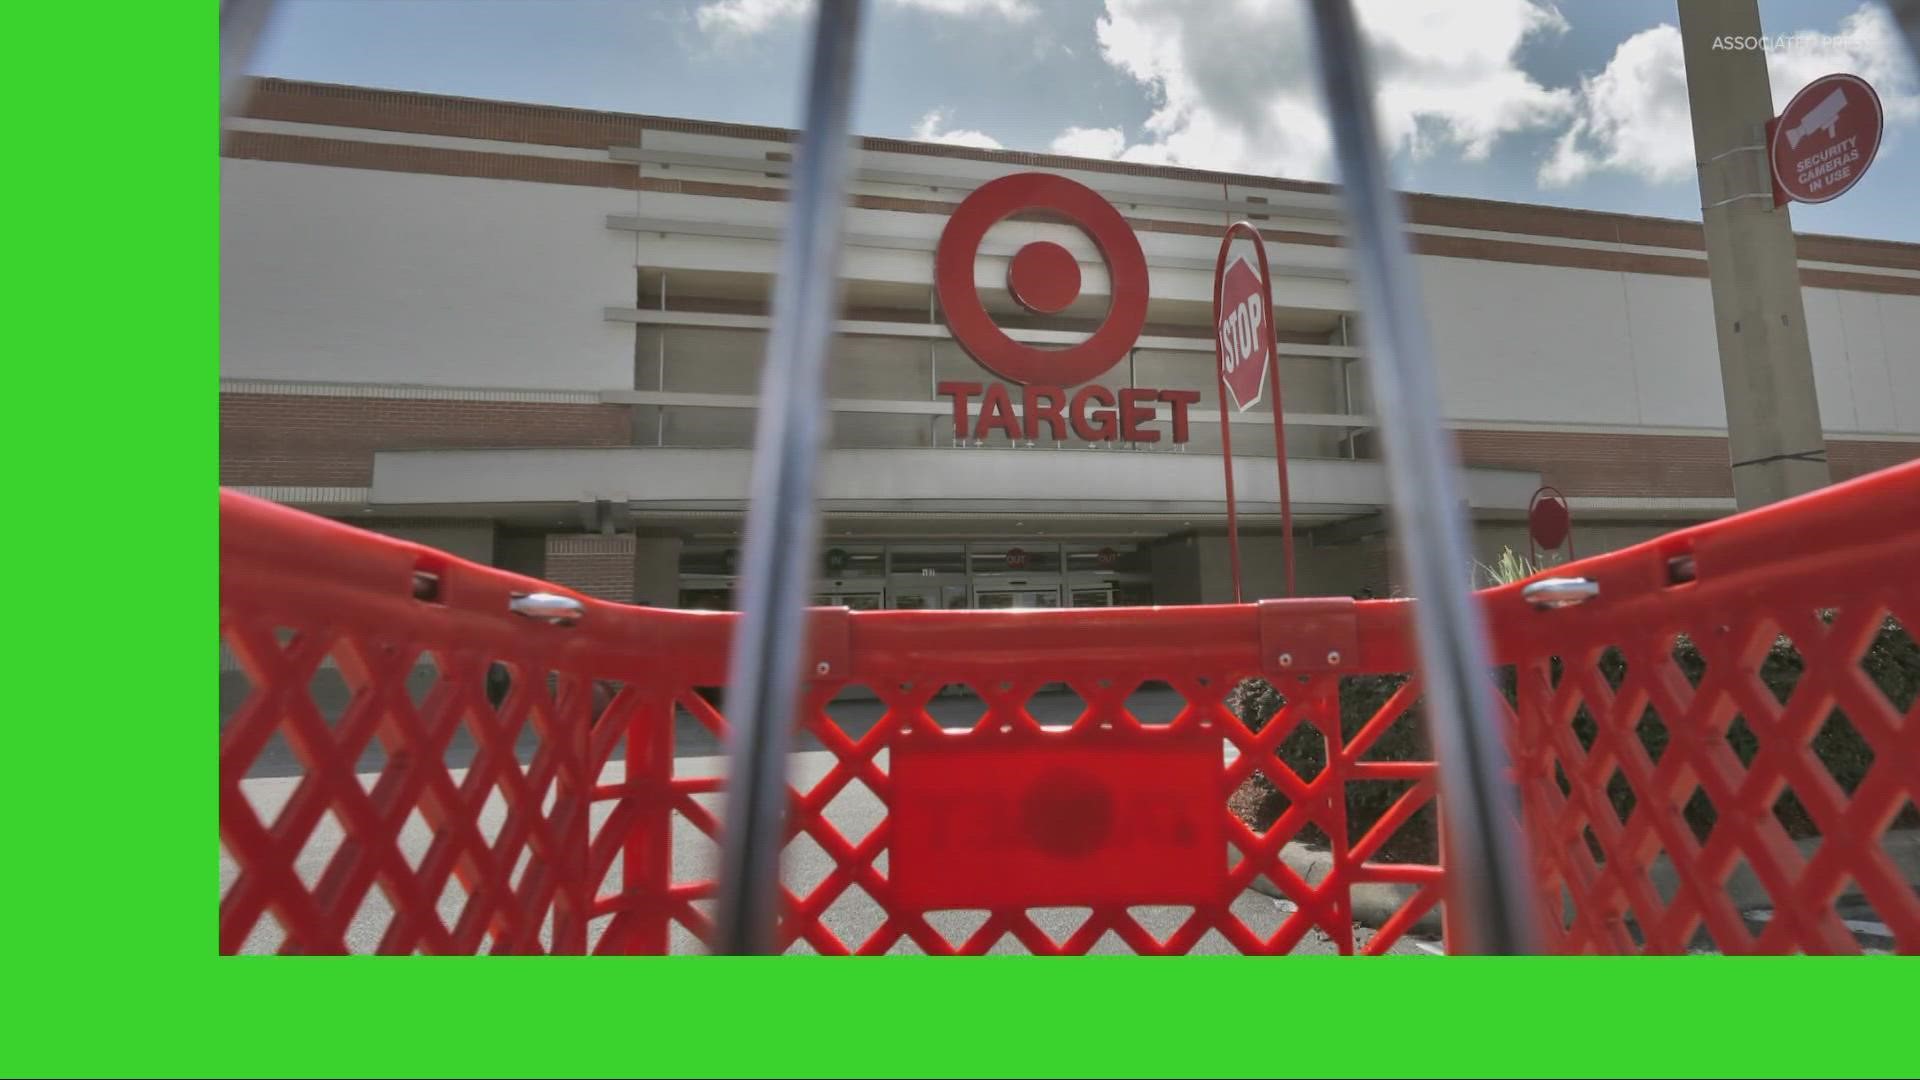 Target told investors that its shelves were overstocked in the wrong areas during the first half of the year, leading to markdowns.